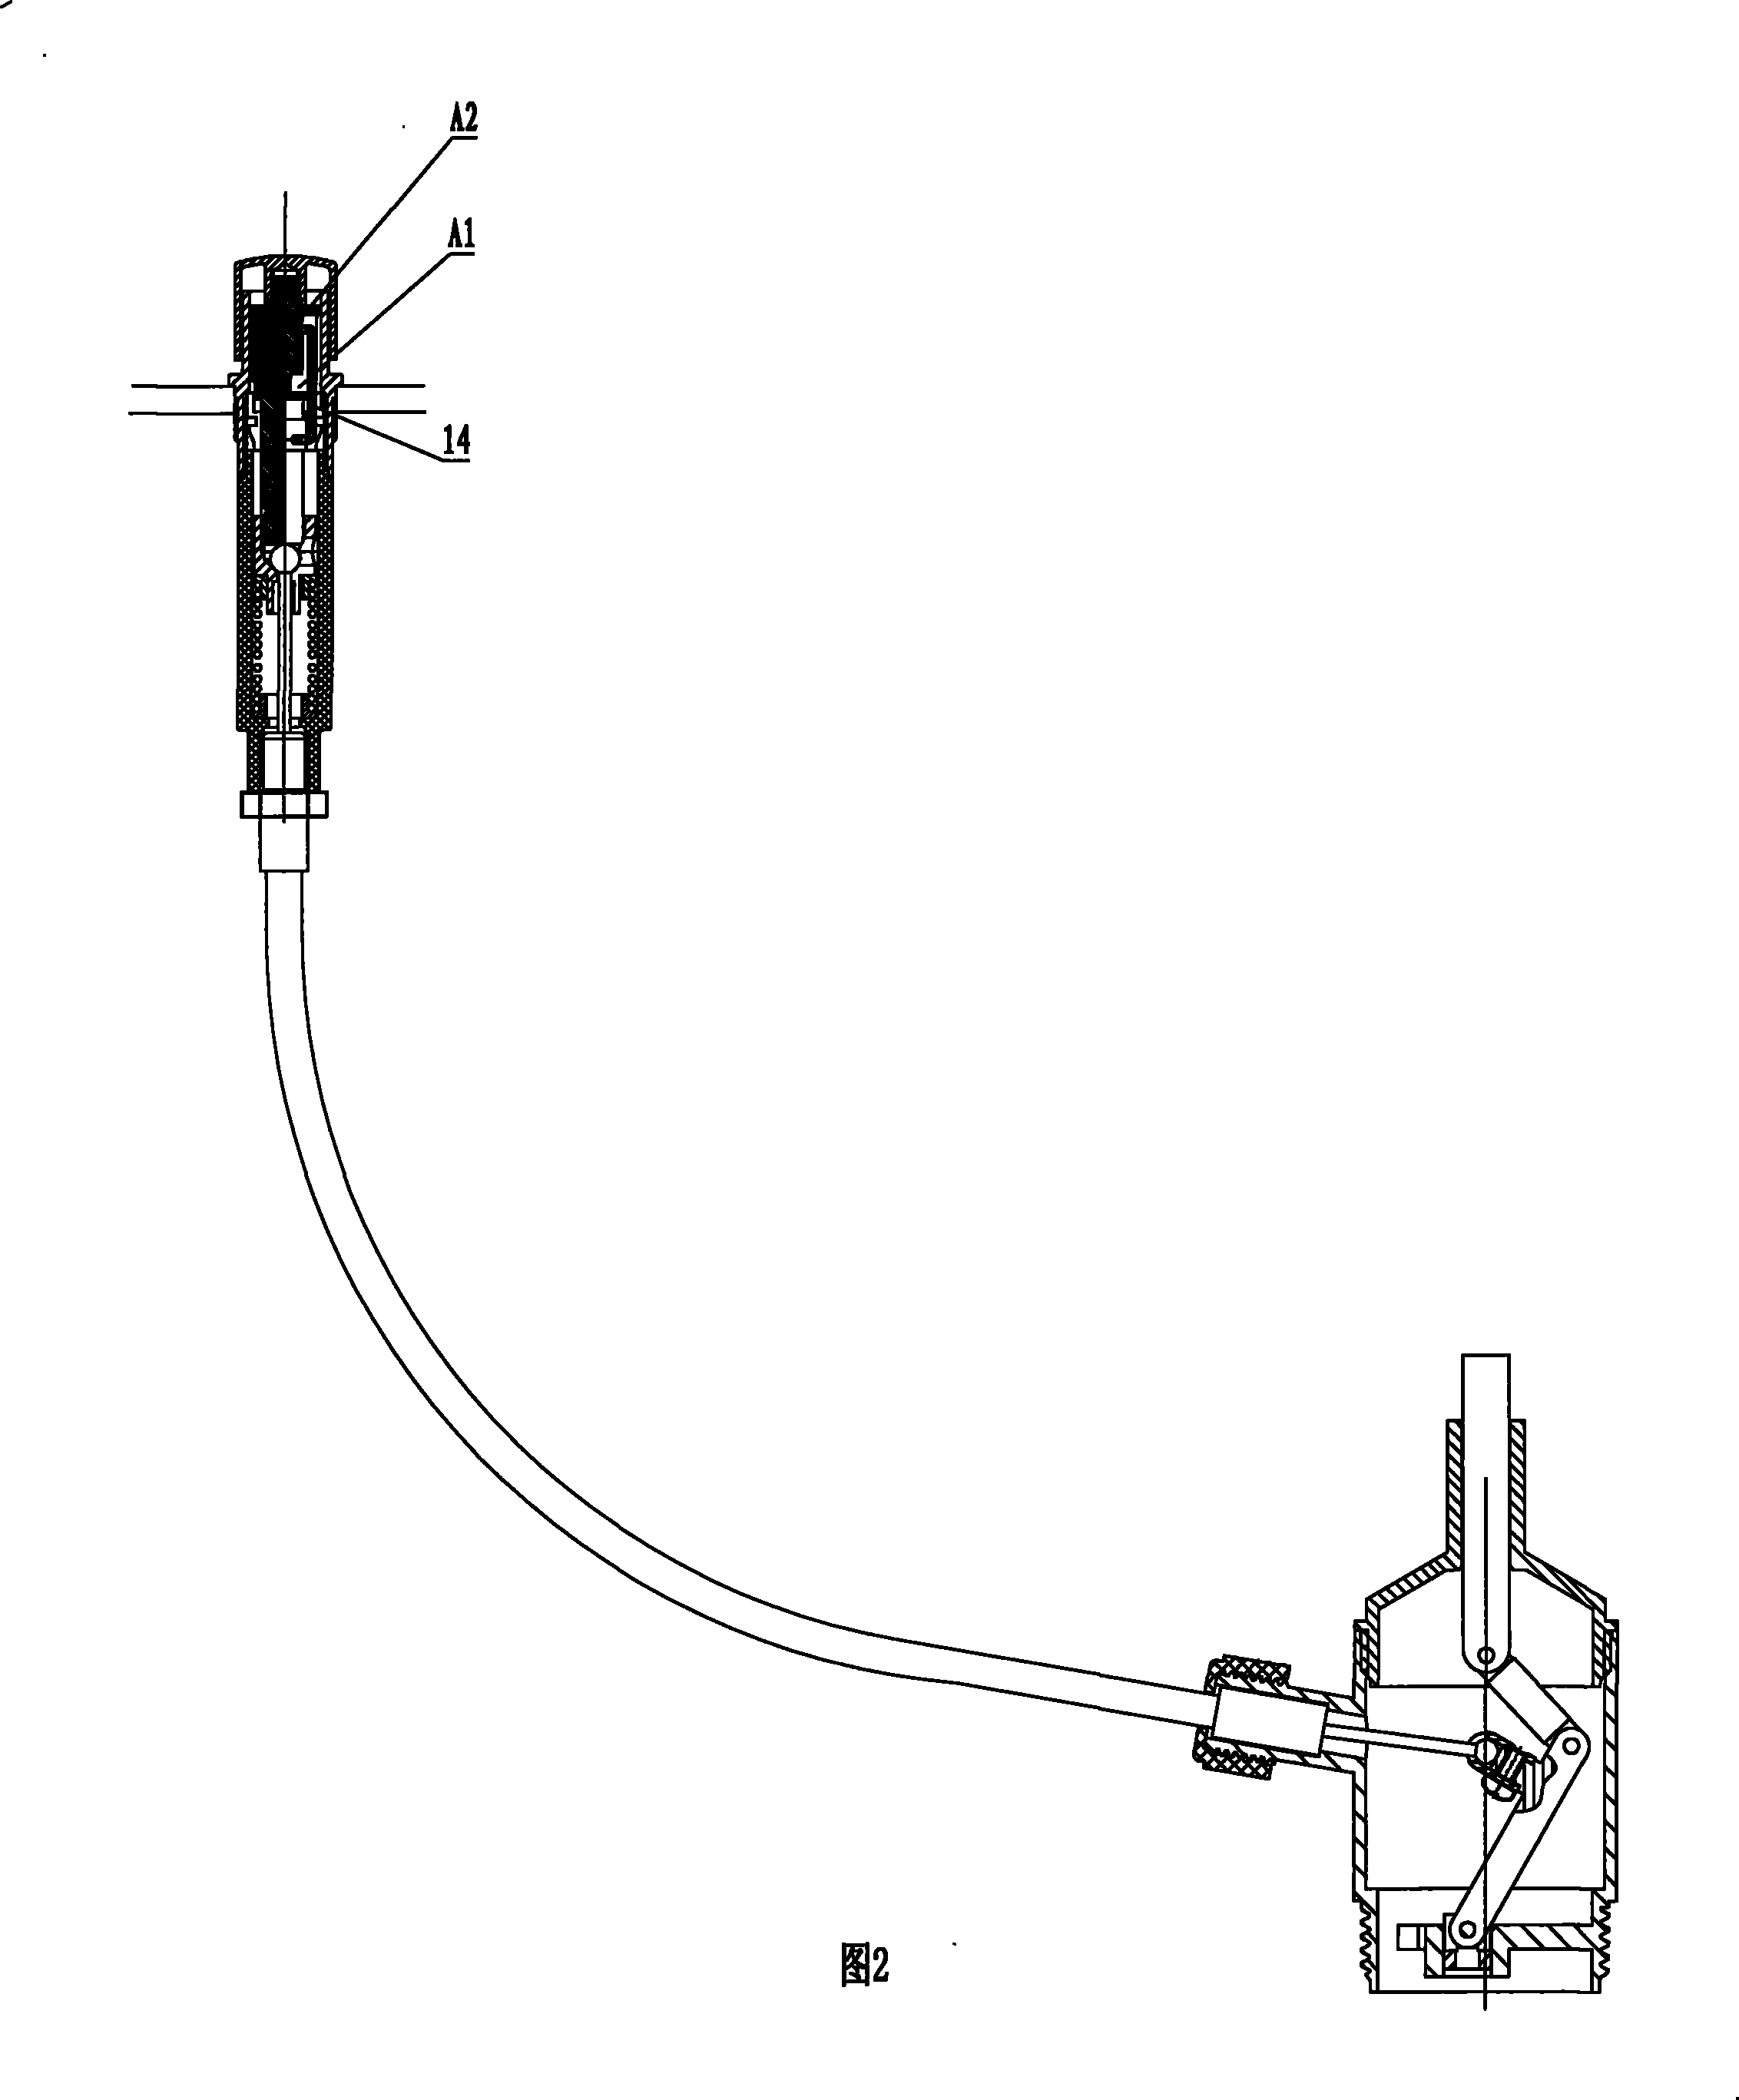 Driving mechanism with positioning function